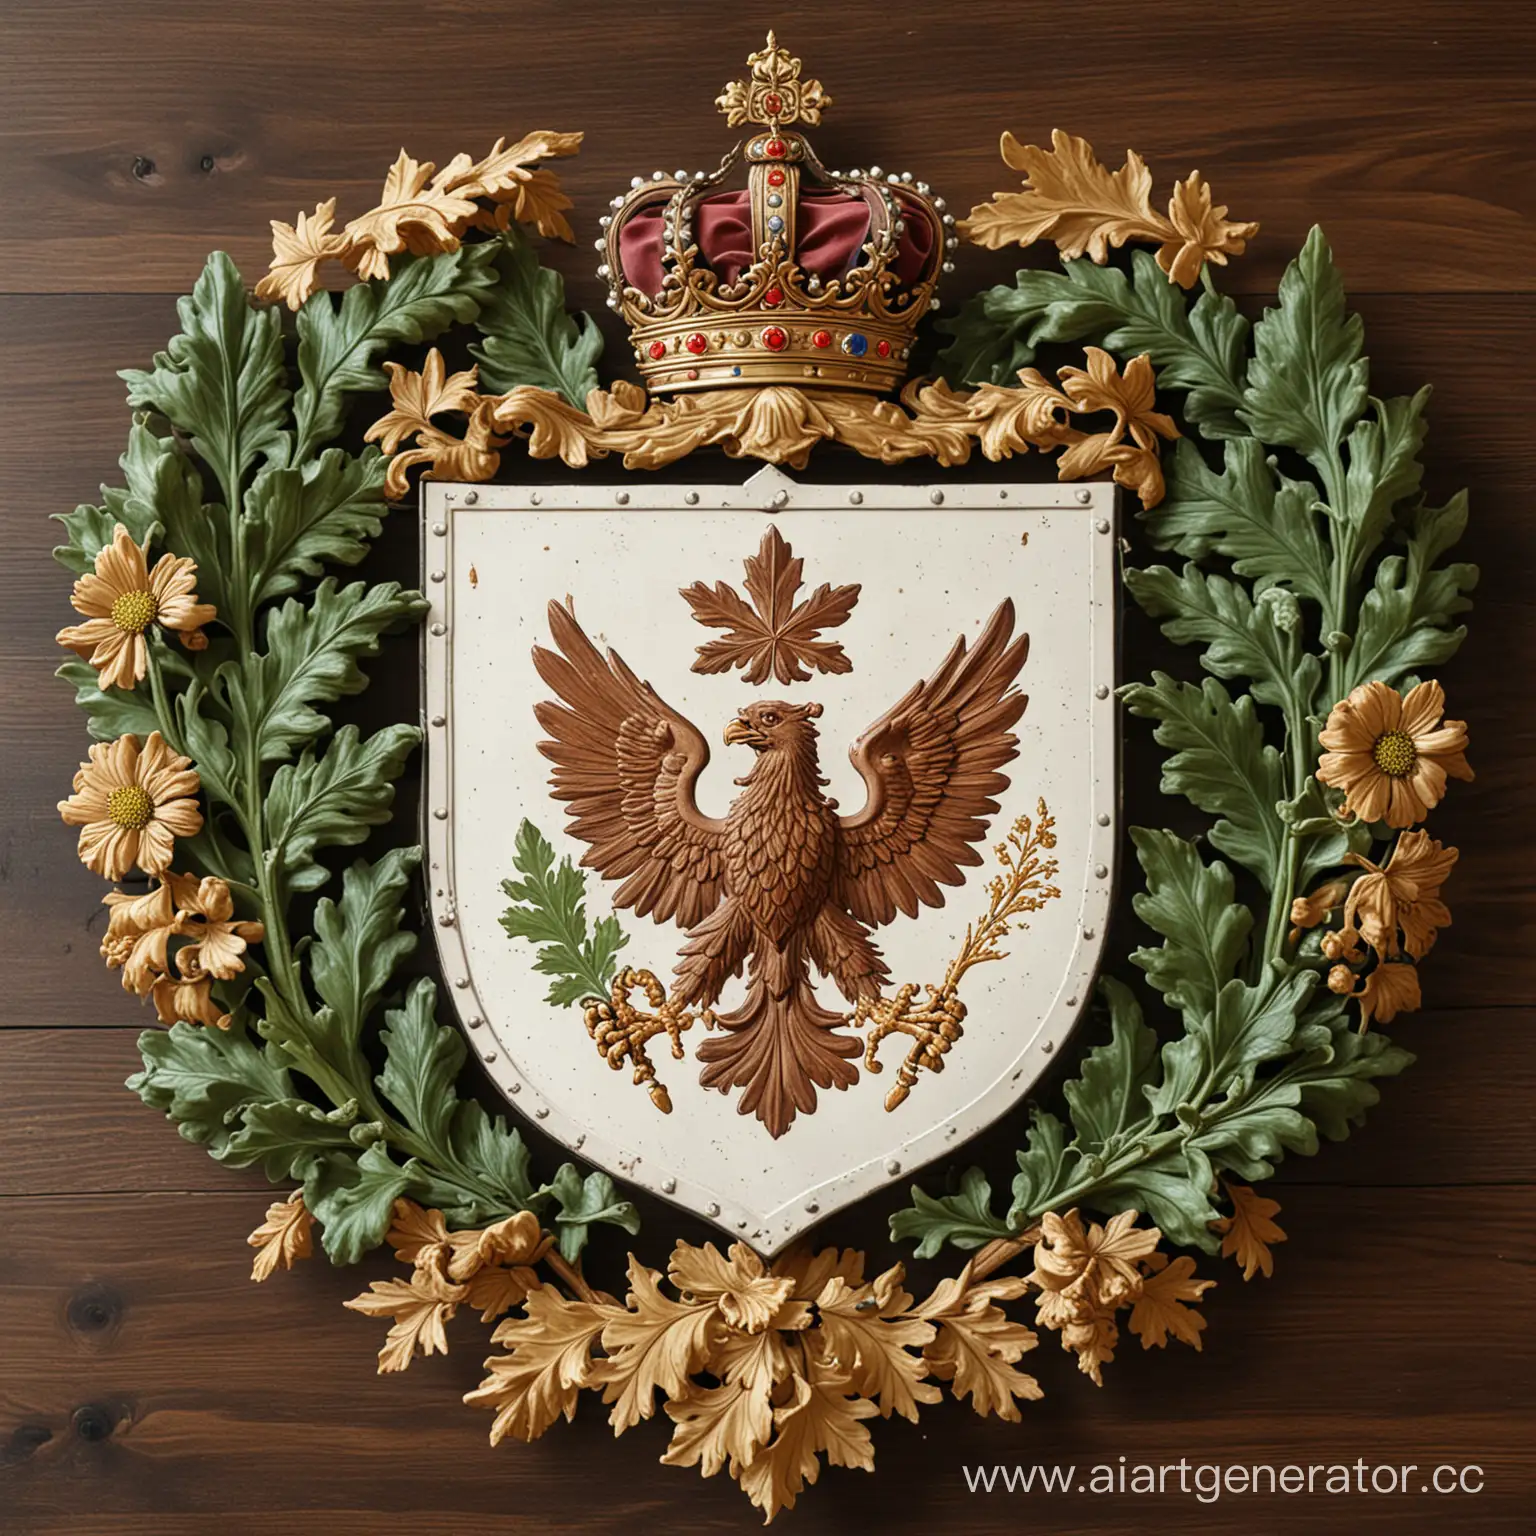 Kozhukhov-Family-Coat-of-Arms-with-Chamomiles-Maple-Leaves-and-Oak-Leaves